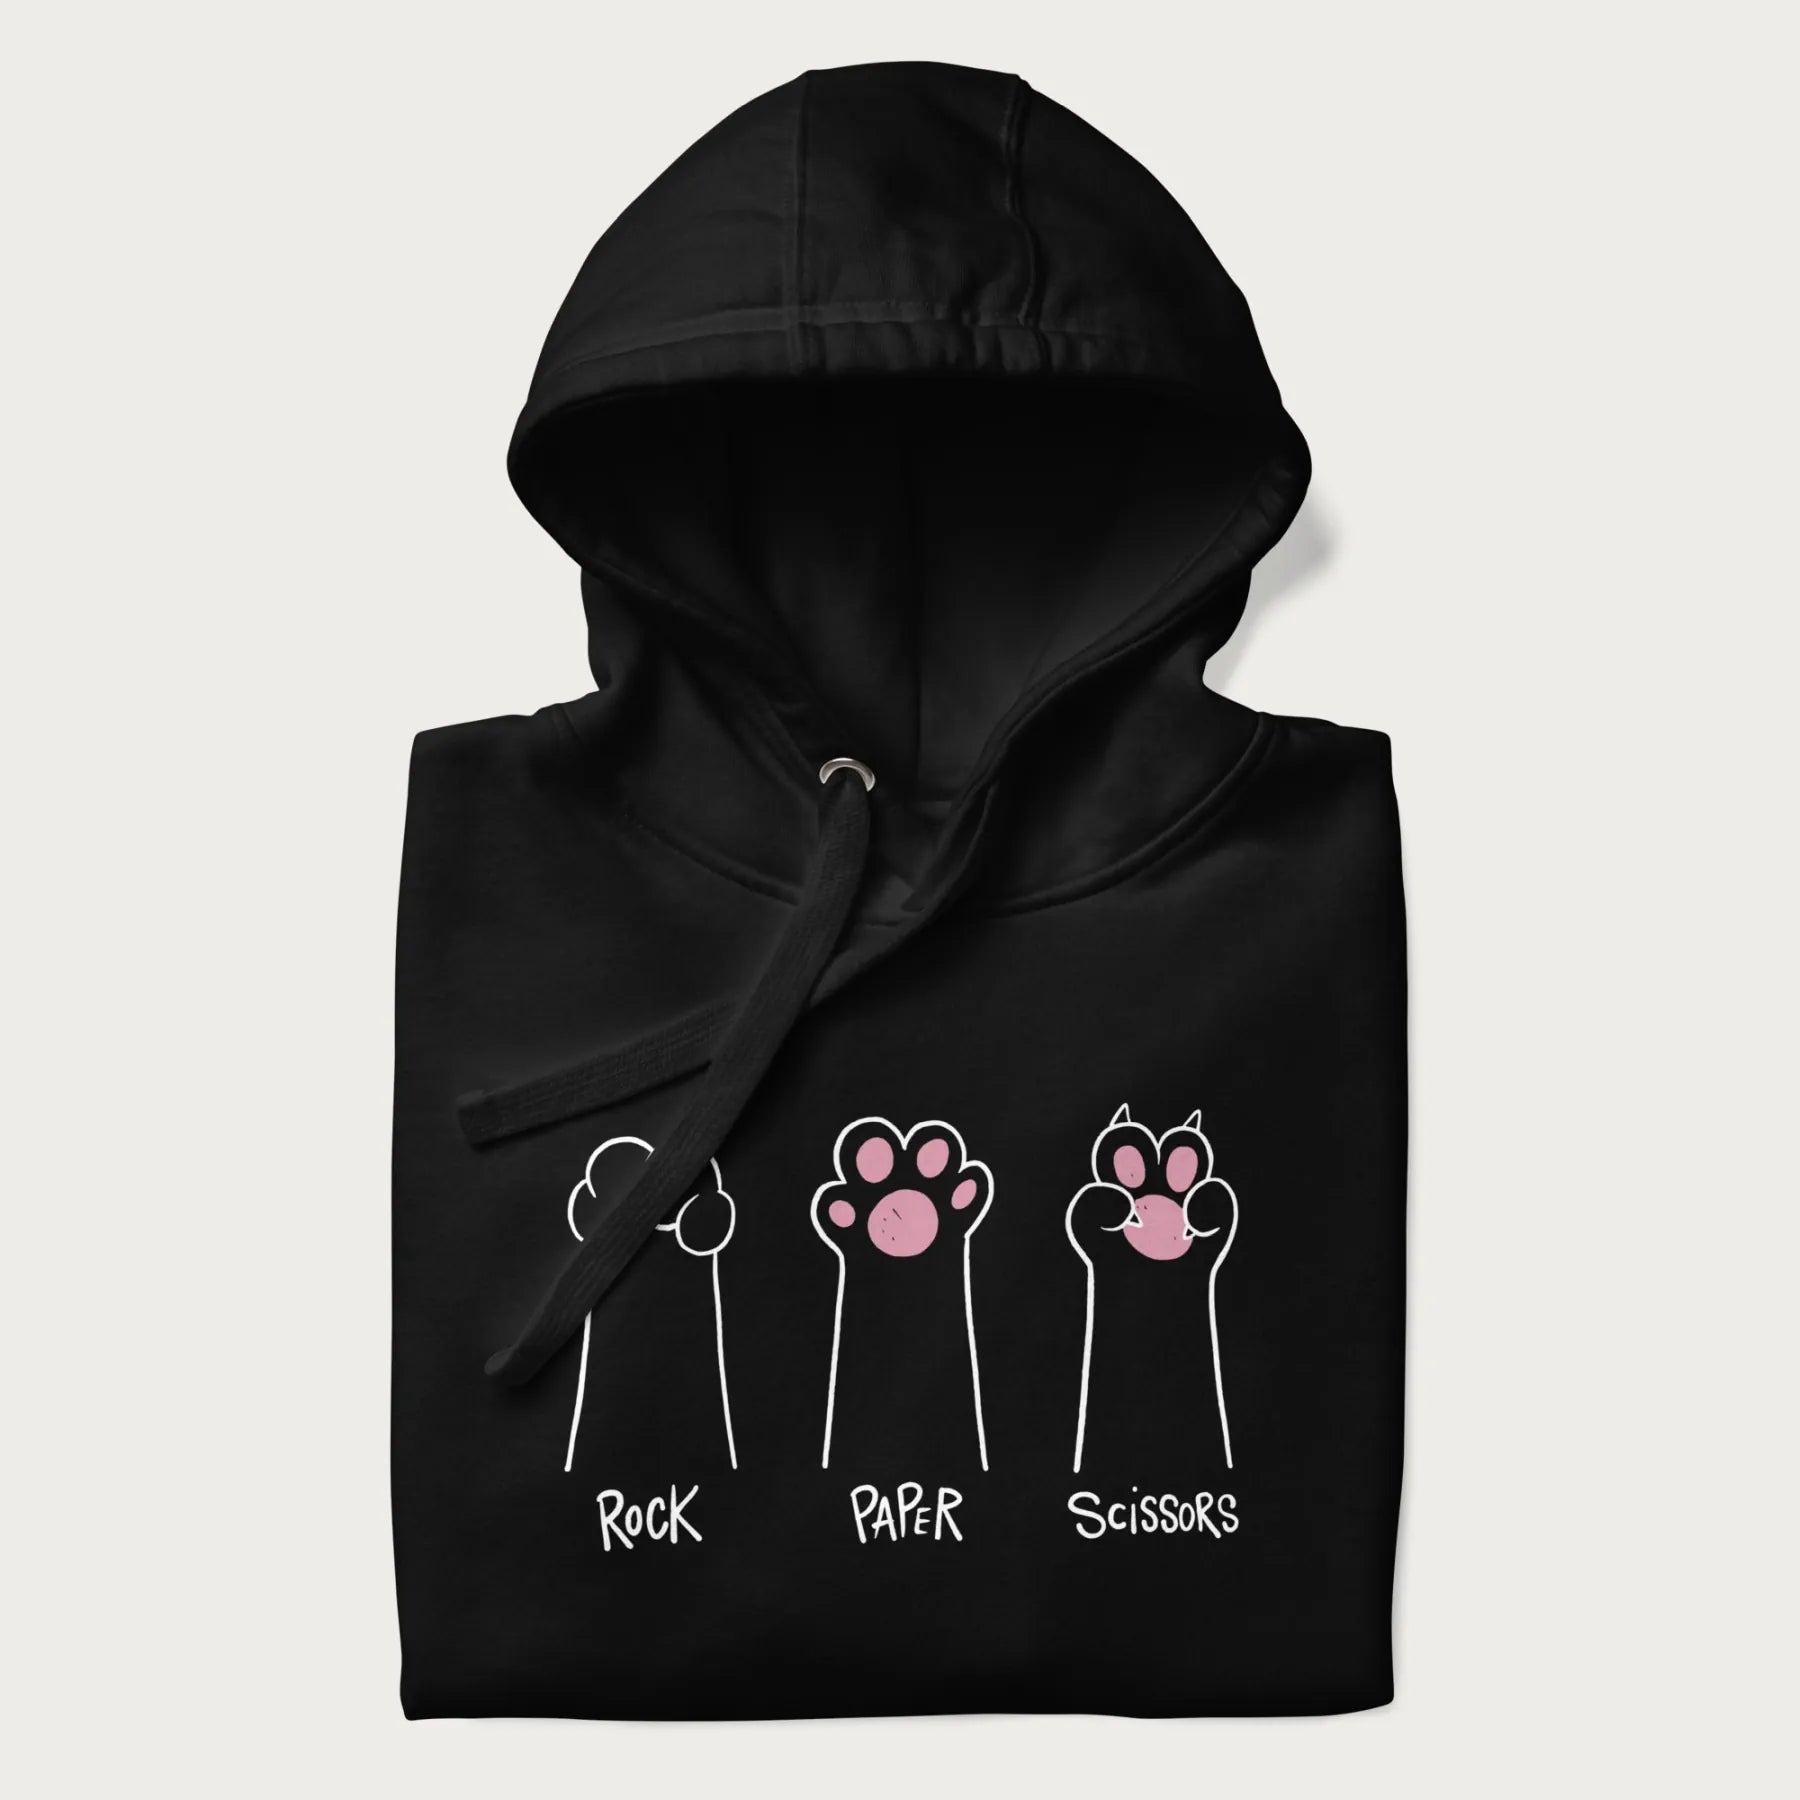 Folded black hoodie with graphic of cat paws playing rock-paper-scissors.